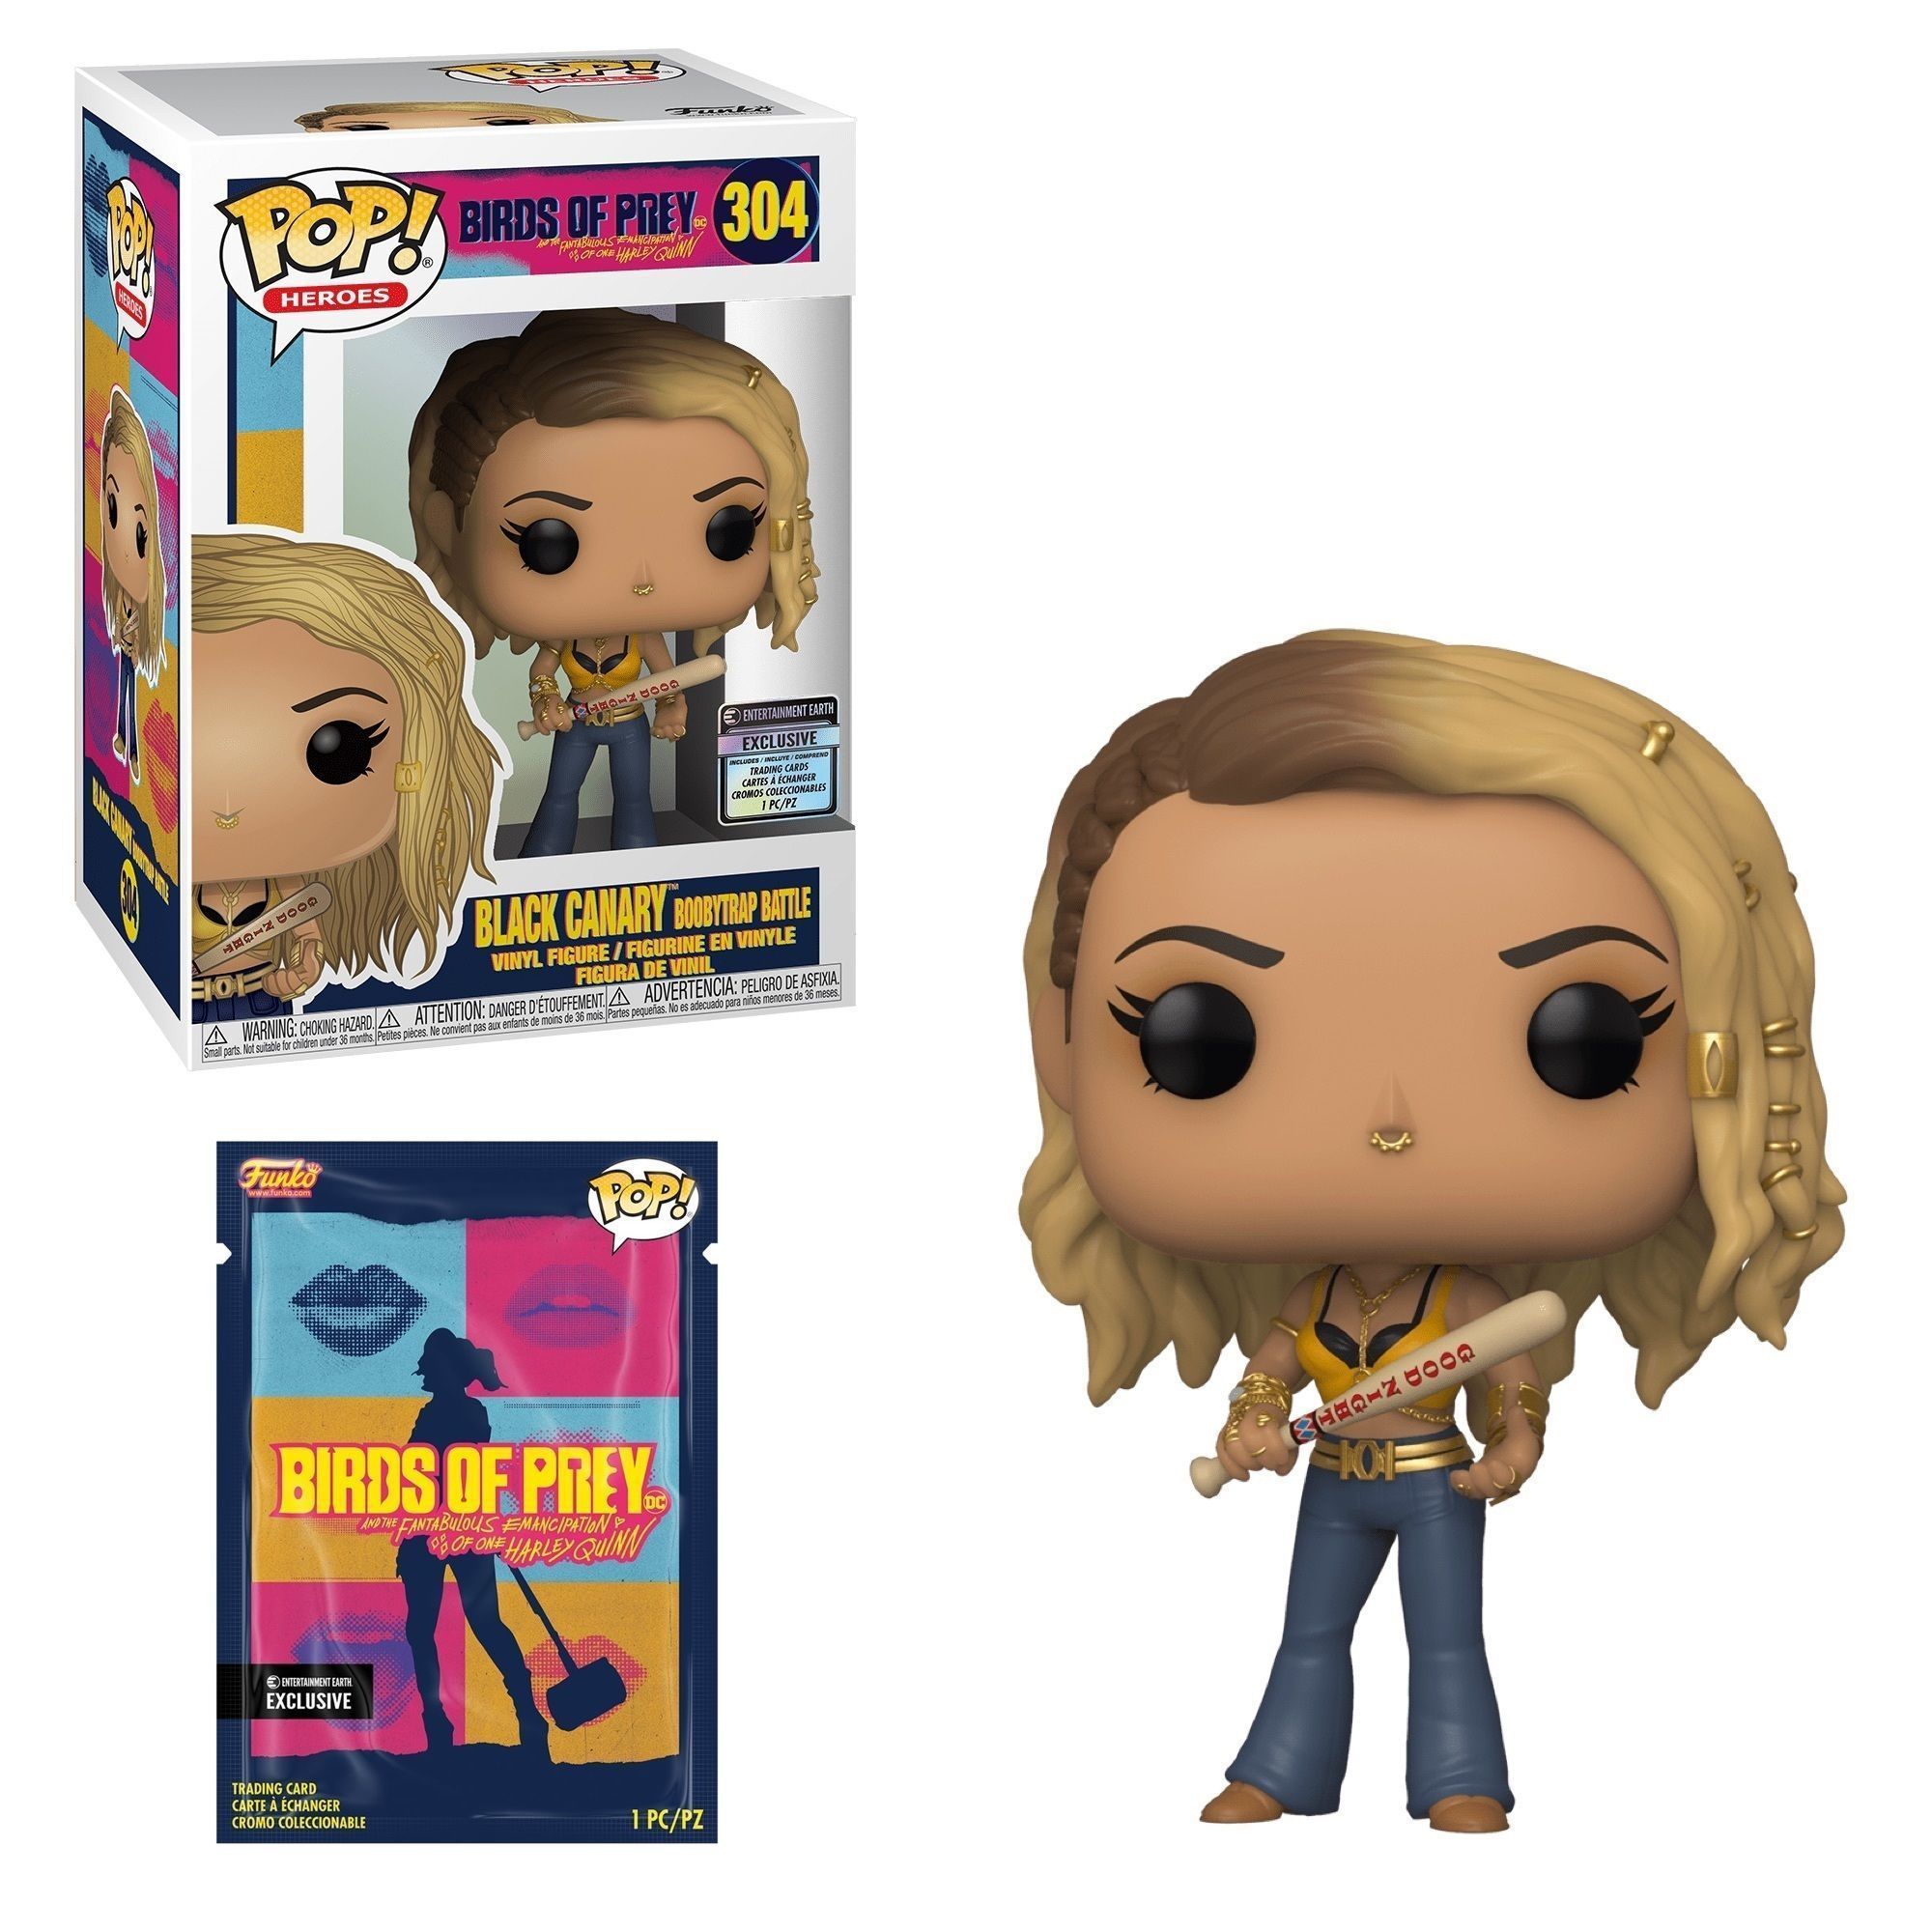 Funko Pop! Black Canary Boobytrap Battle (Collectible Cards)